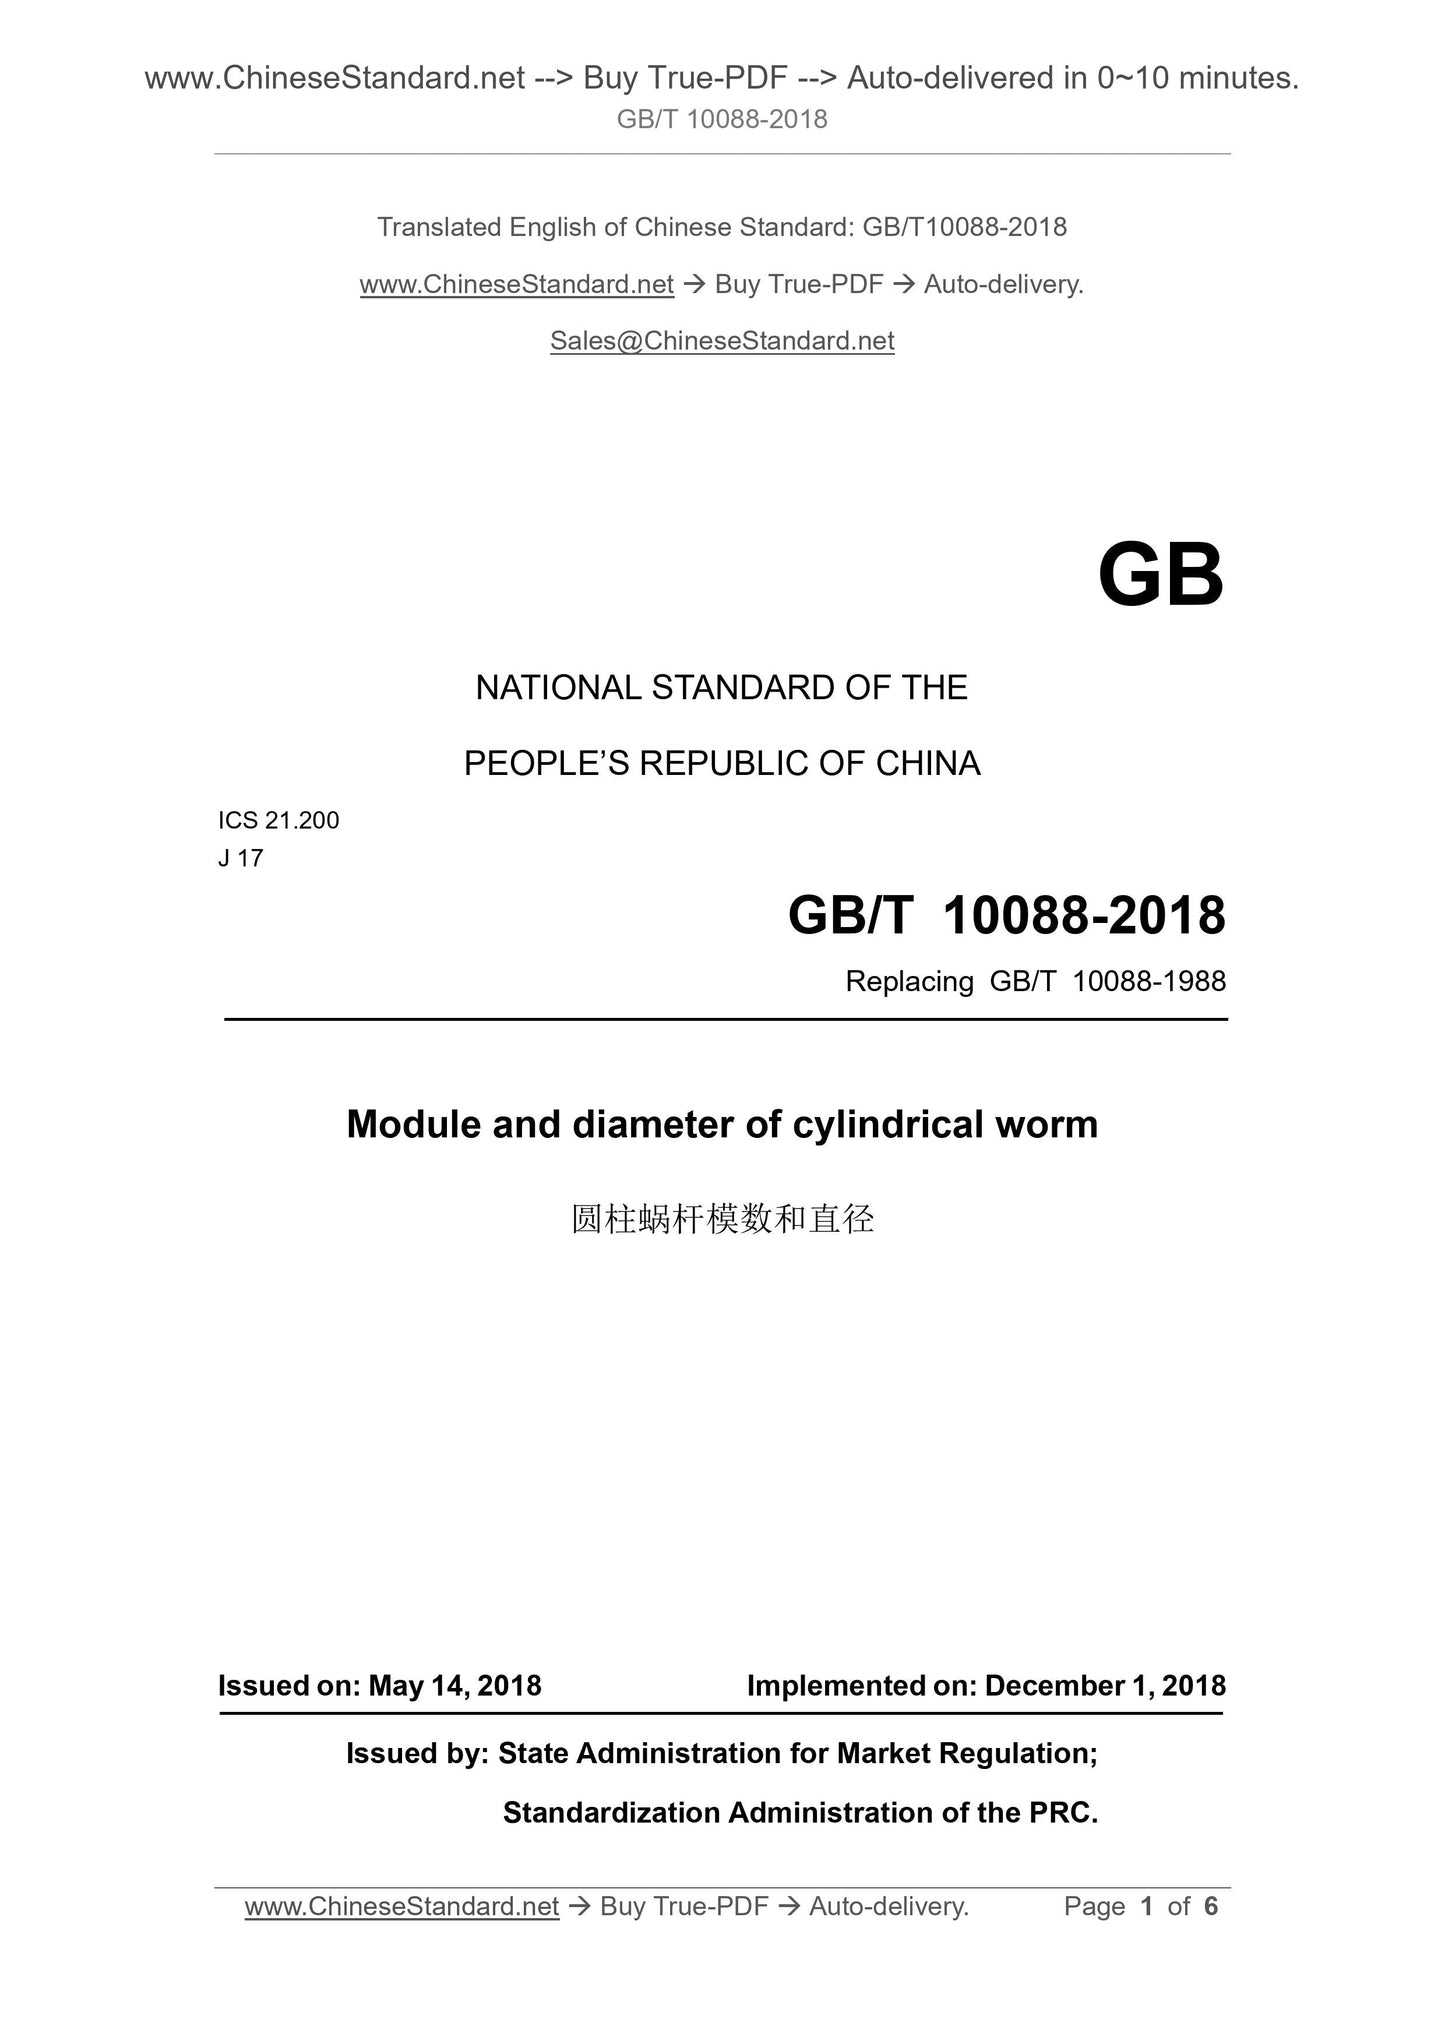 GB/T 10088-2018 Page 1